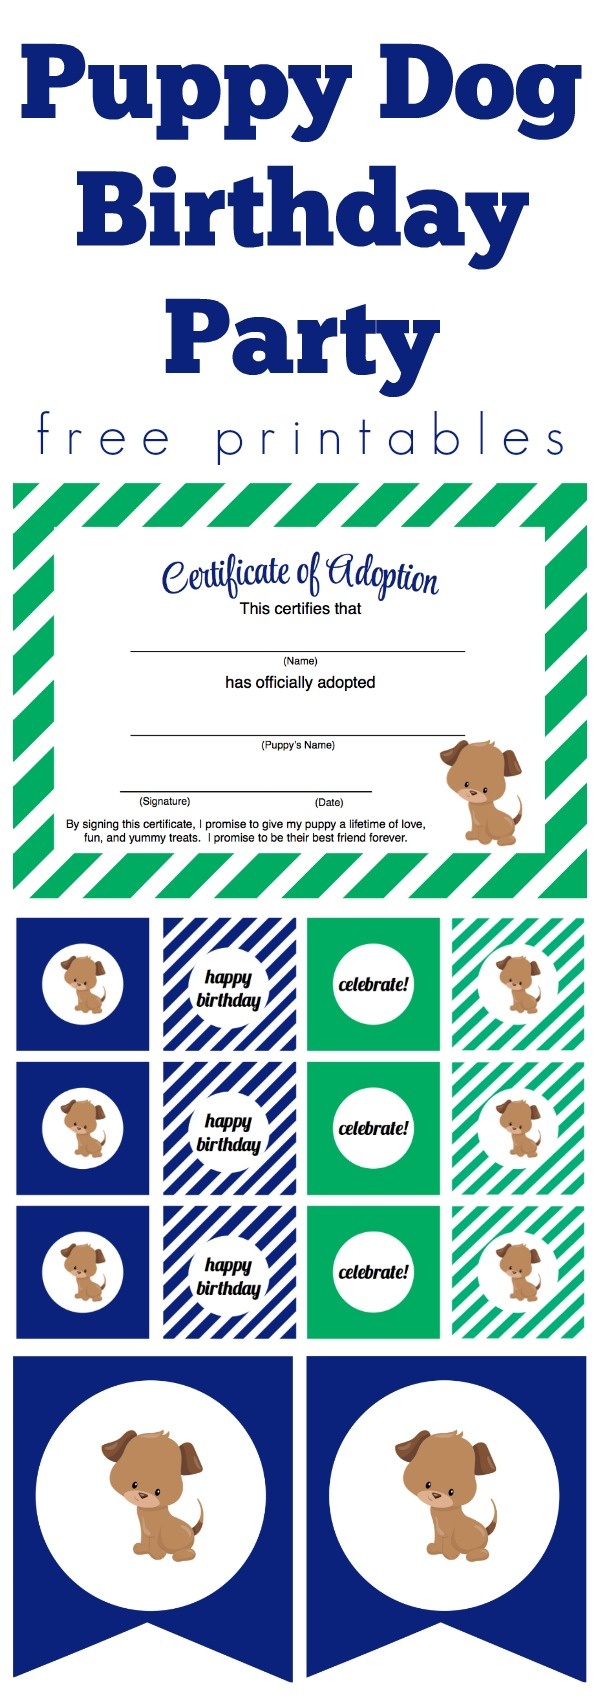 We Heart Parties: Free Printables Puppy Dog Party Free Printables - Dog Birthday Invitations Free Printable